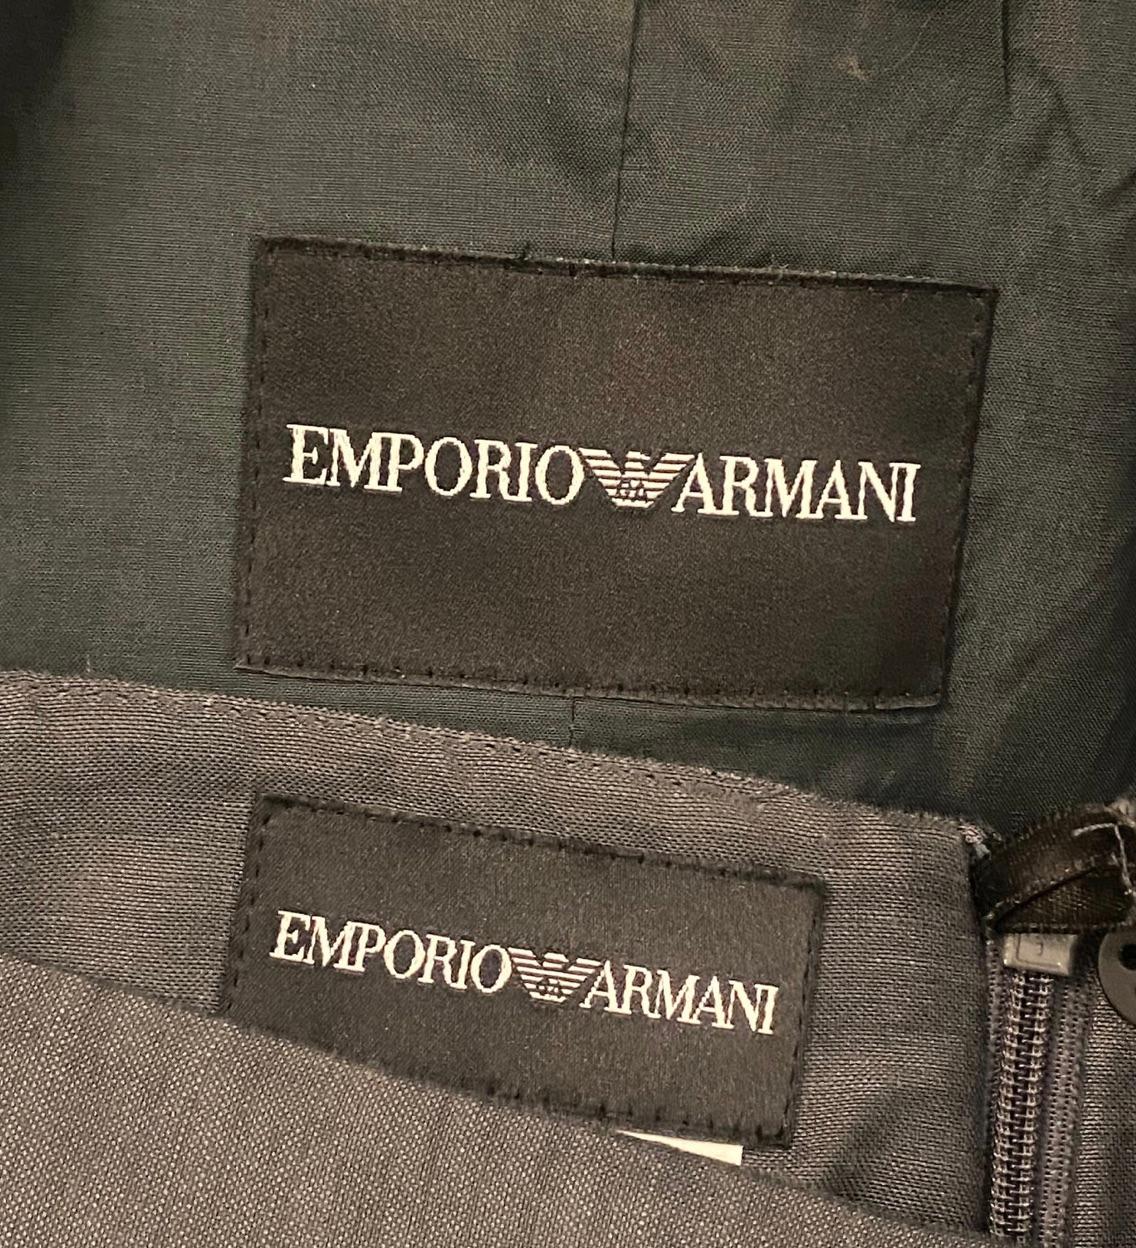 Emporio Armani Linen Two Piece In Excellent Condition For Sale In Glasgow, GB